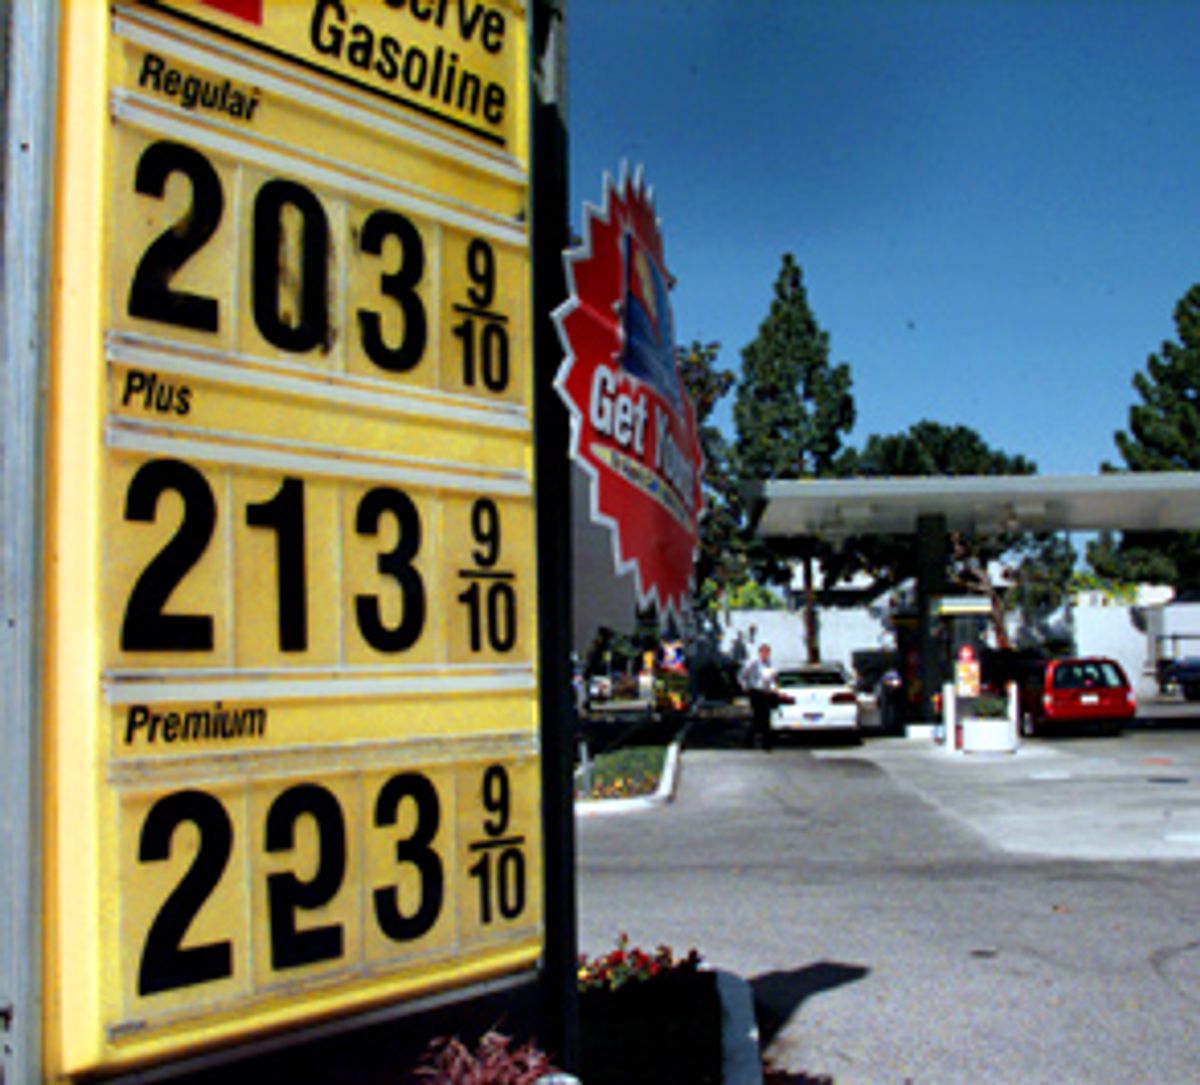 Gas prices are displayed at a gas station in Palo Alto, Calif., Wednesday, March 29, 2000. California oil companies are adding to motorists' misery at the pump by making excessive profits on gasoline, Attorney General Bill Lockyer says. He suggested Tuesday that lawmakers approve an excess profits tax combined with a corresponding cut in the gasoline sales tax to ease California prices, which are running about 19 cents more per gallon than those in the rest of the country. (AP Photo/Paul Sakuma)  (Associated Press)